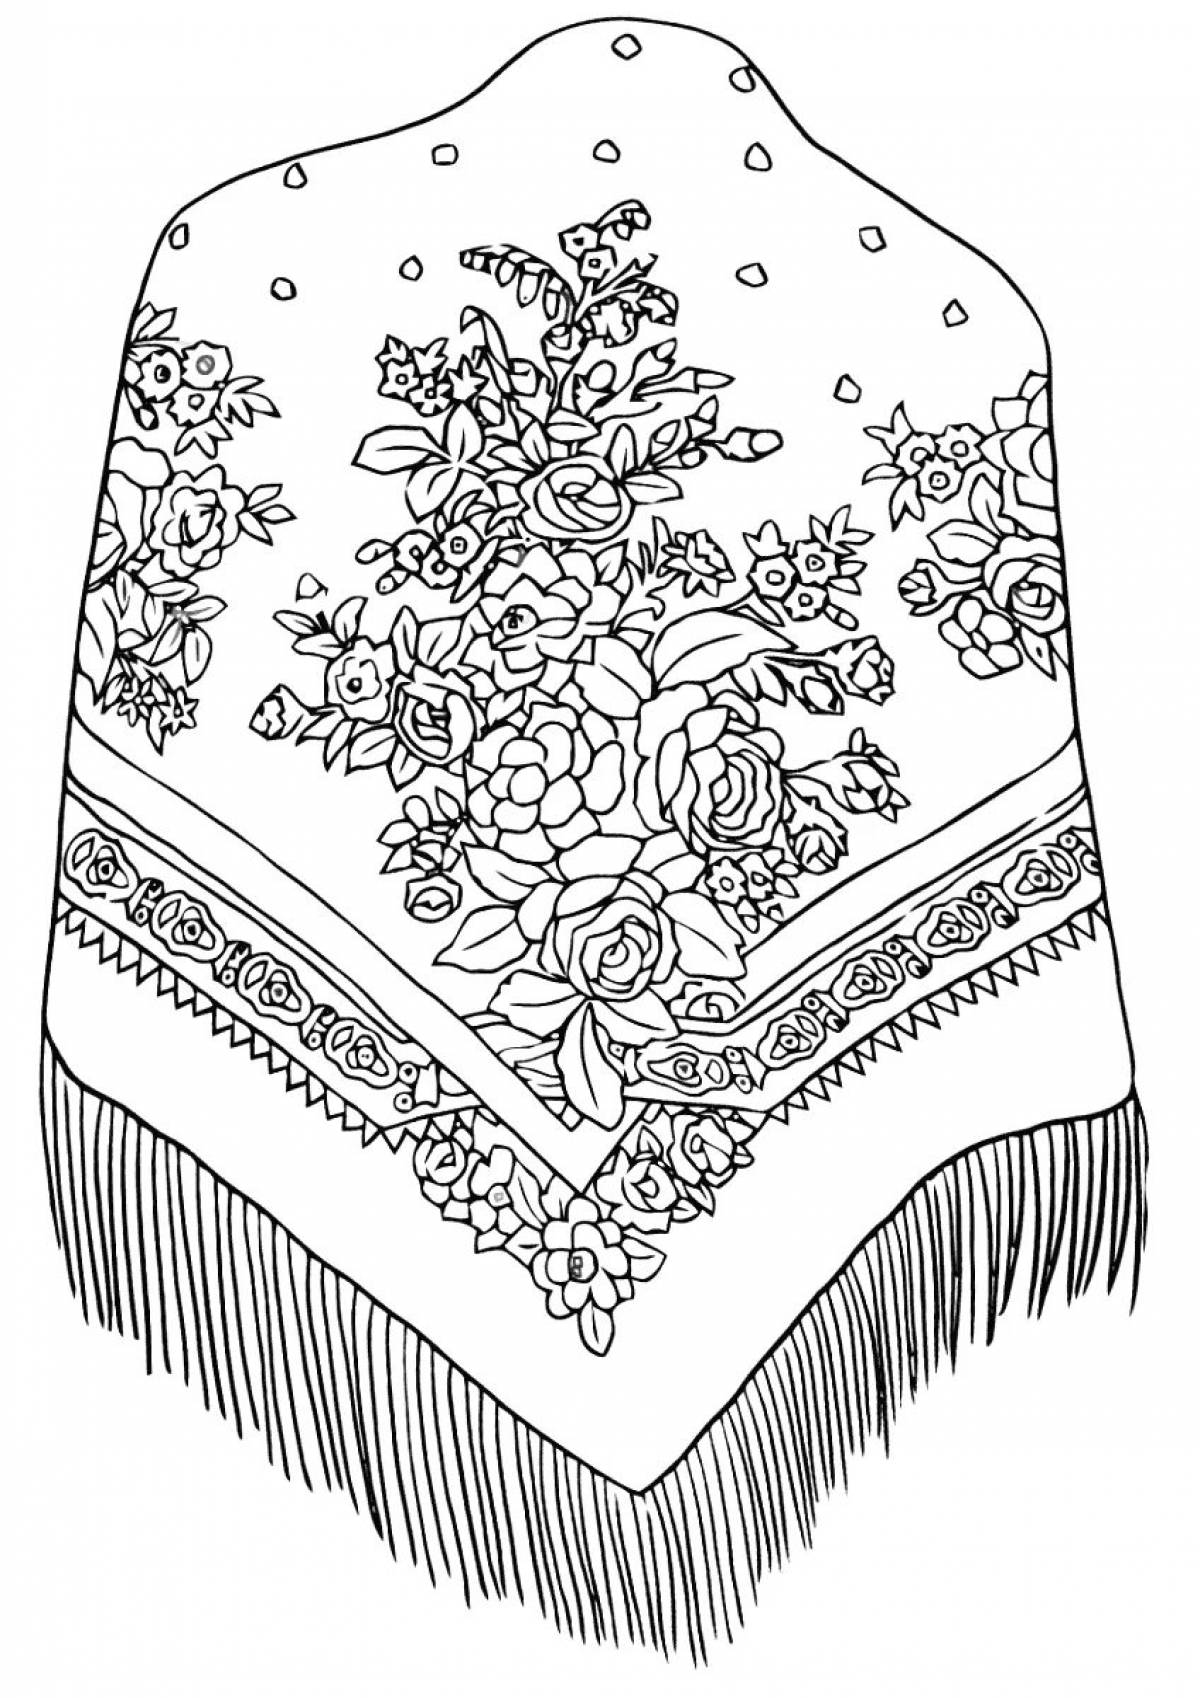 Attractive Pavloposad scarf coloring book for children